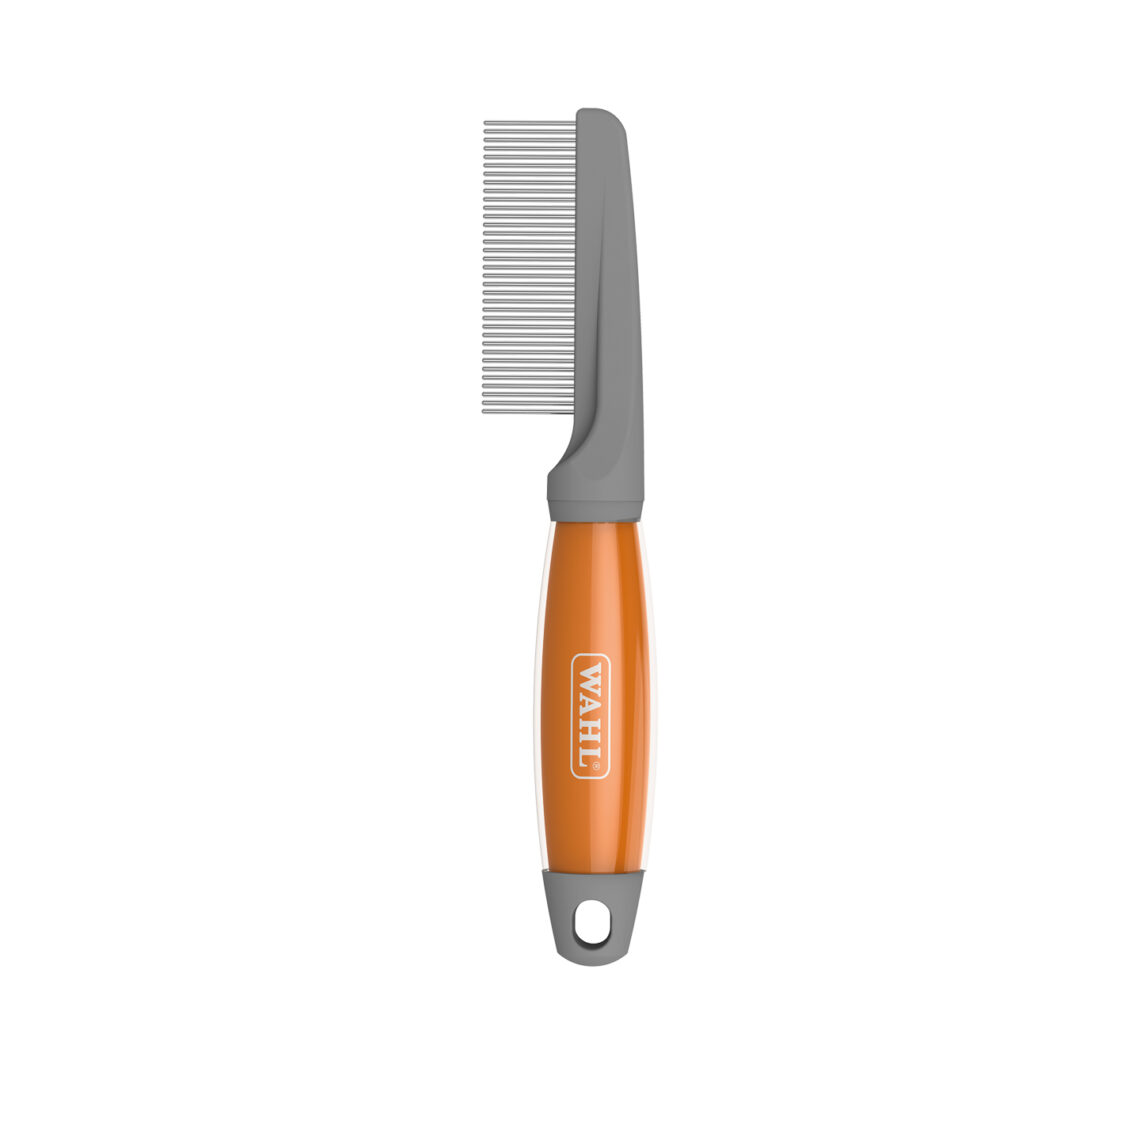 grooming comb with blade